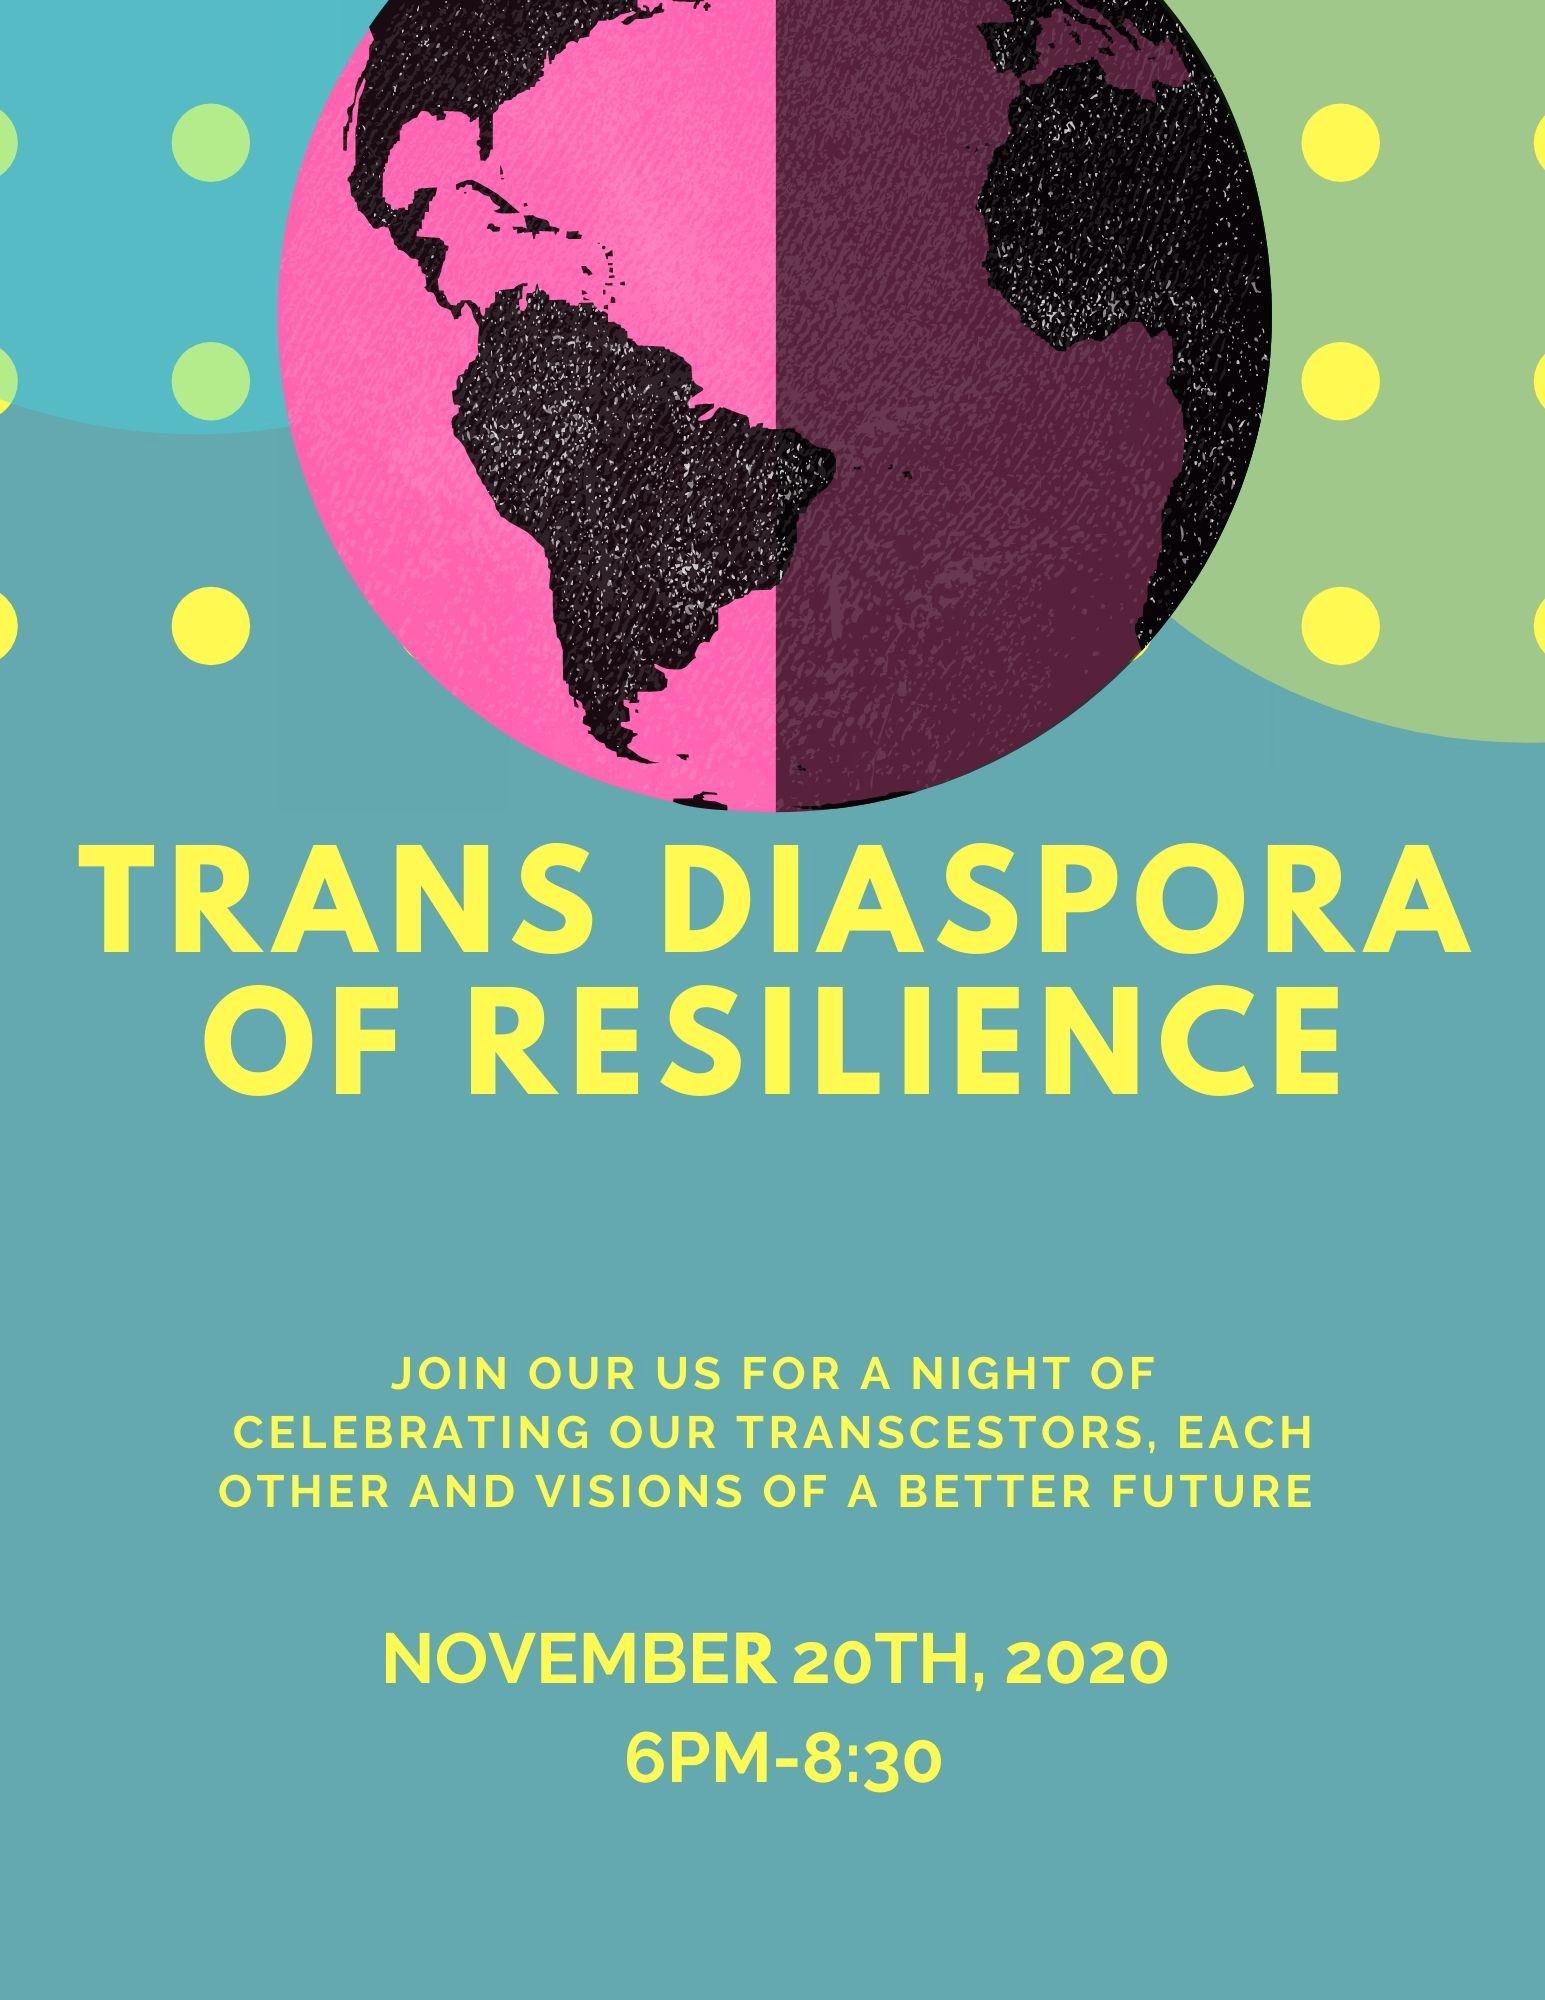 Trans Diaspora Of Resilience | Join our us for a night of celebrating our transcestors, each other and visions of a better future | November 20th, 2020, 6PM-8:30